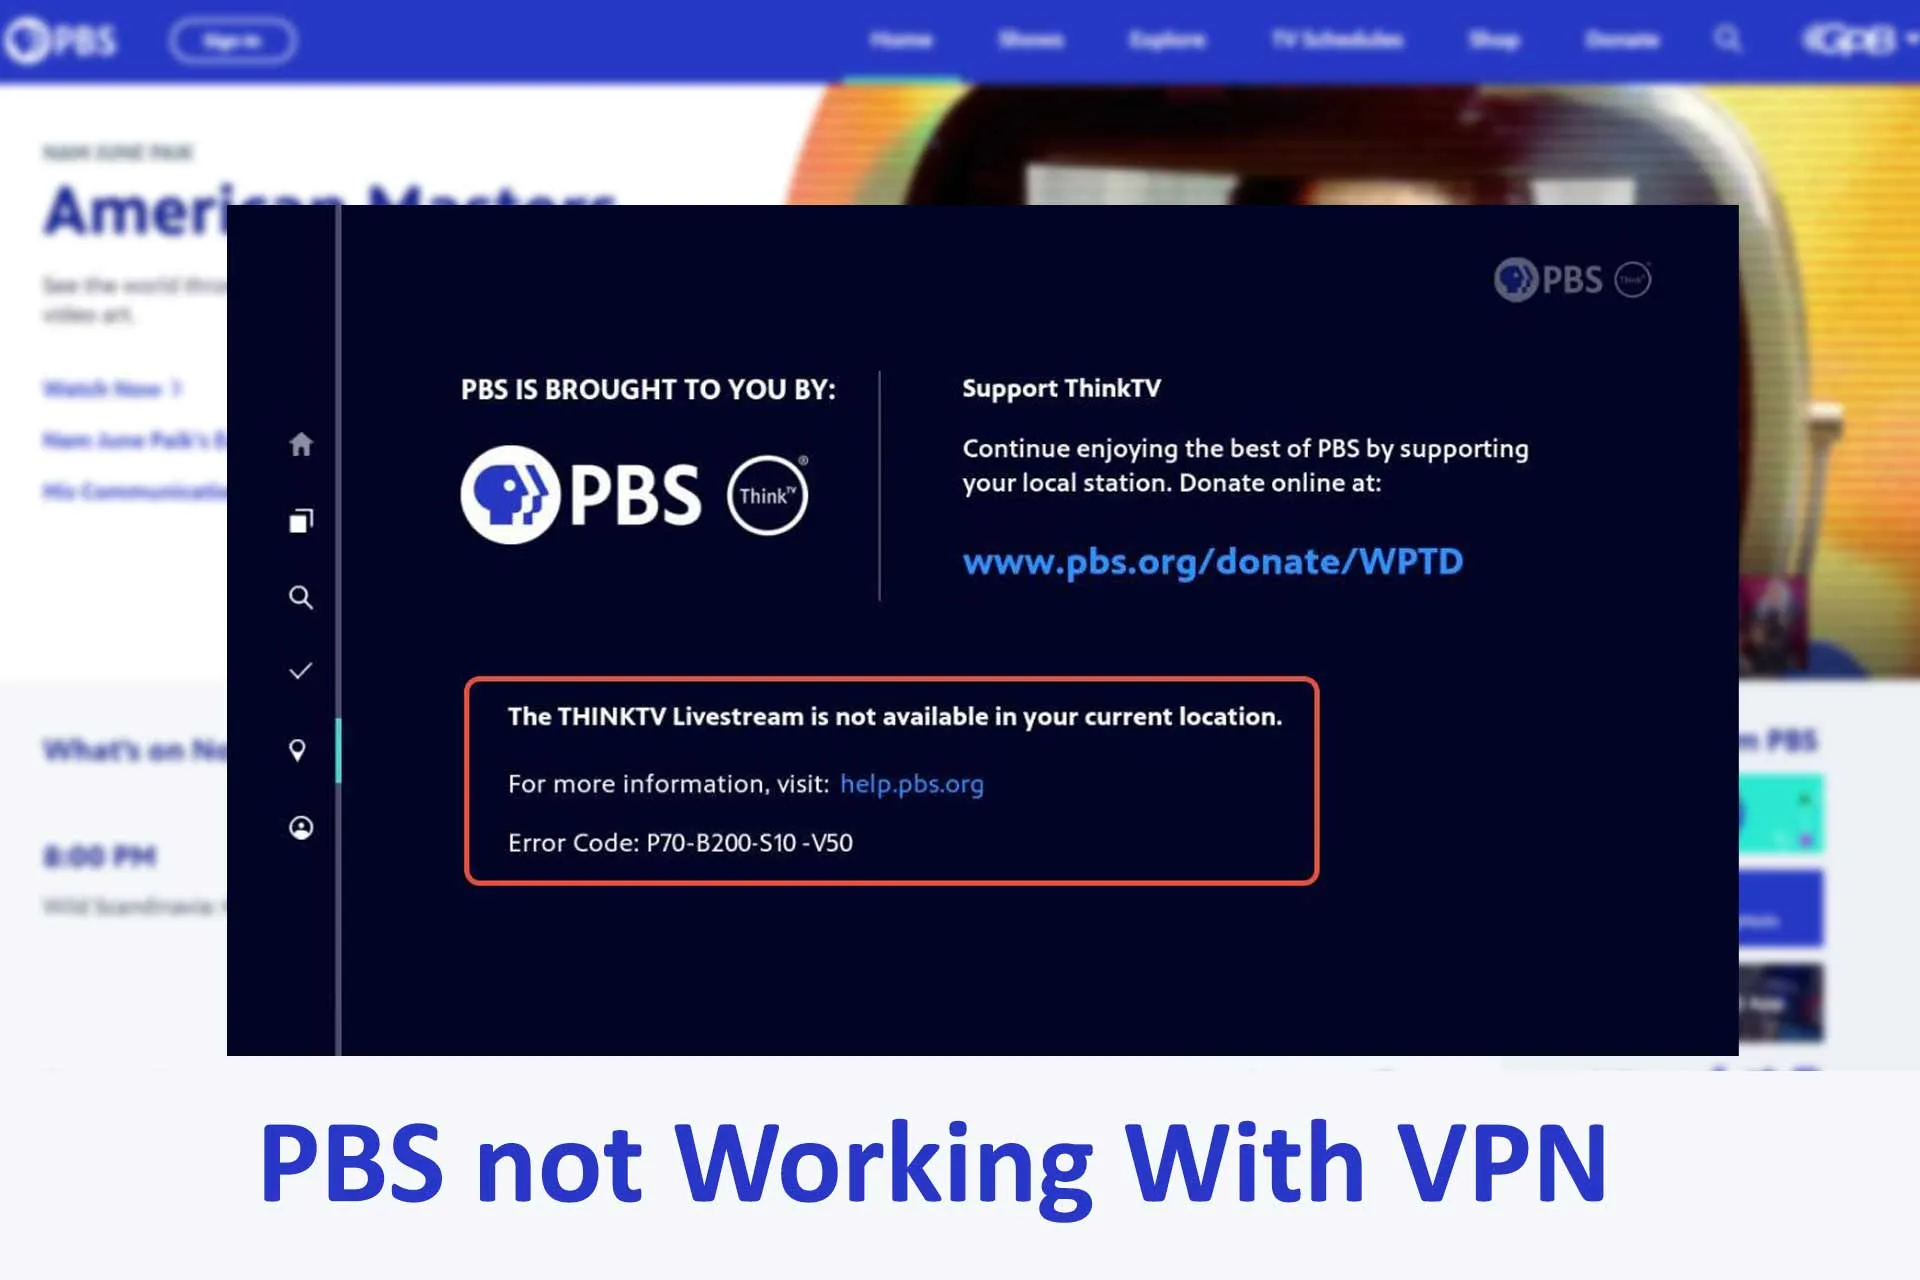 PBS not working with VPN